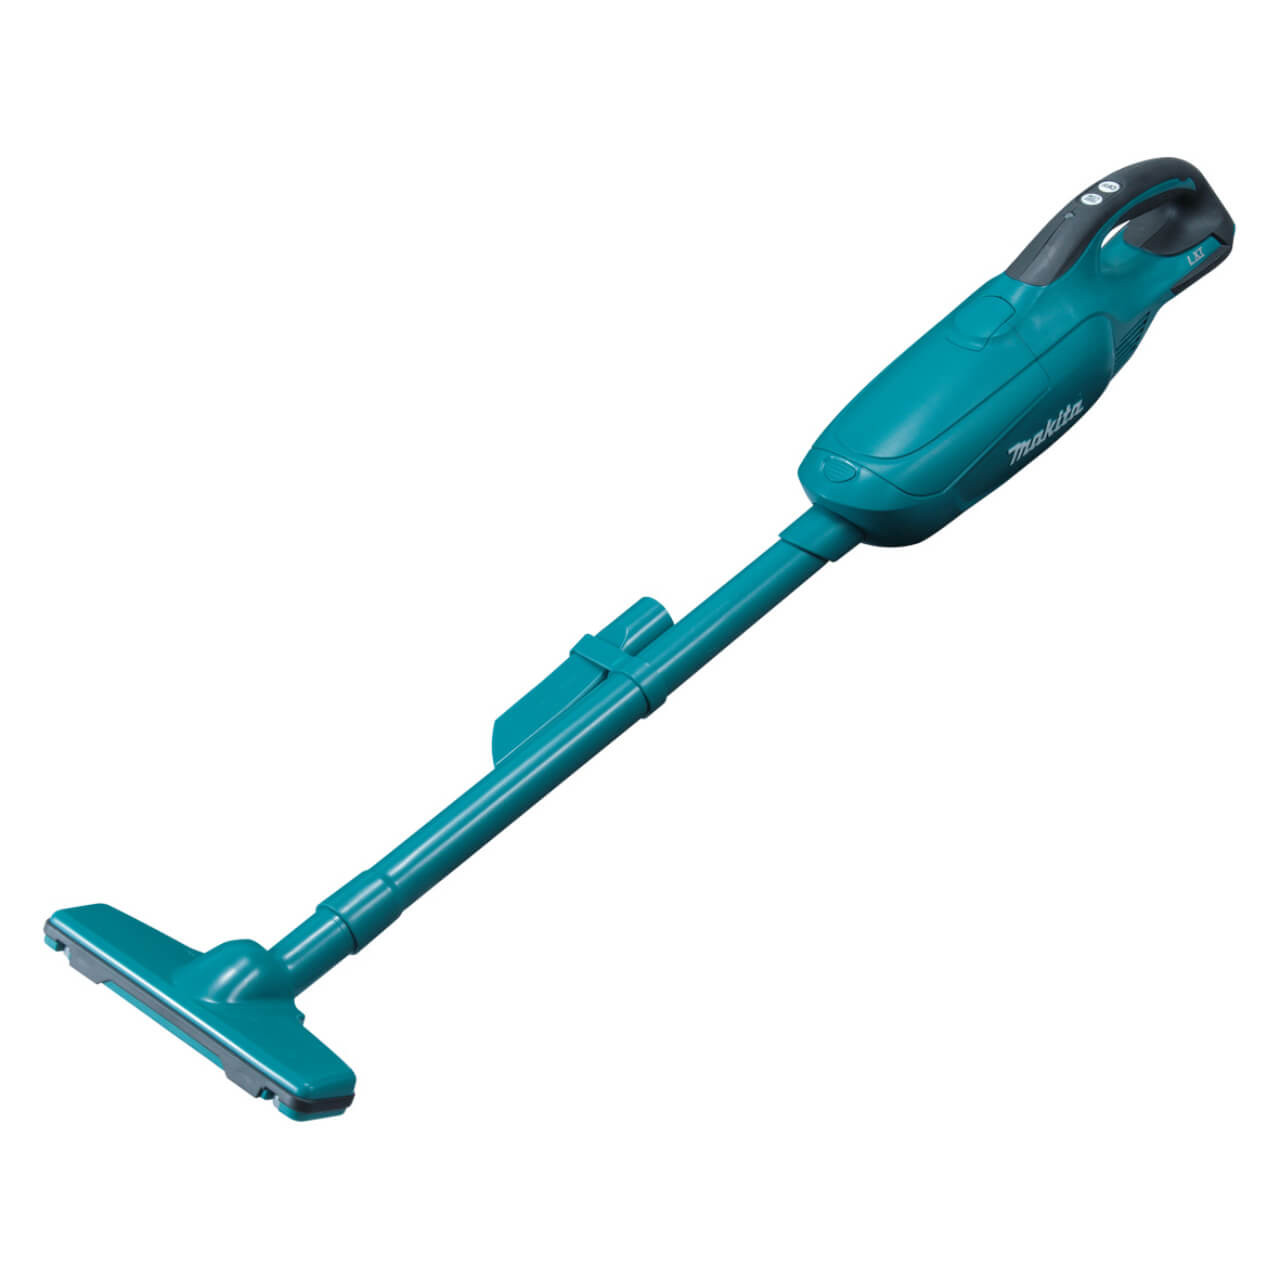 Makita 18V Stick Vacuum. Push Button Switch. Disposable Dust Bag. Teal Housing - Tool Only